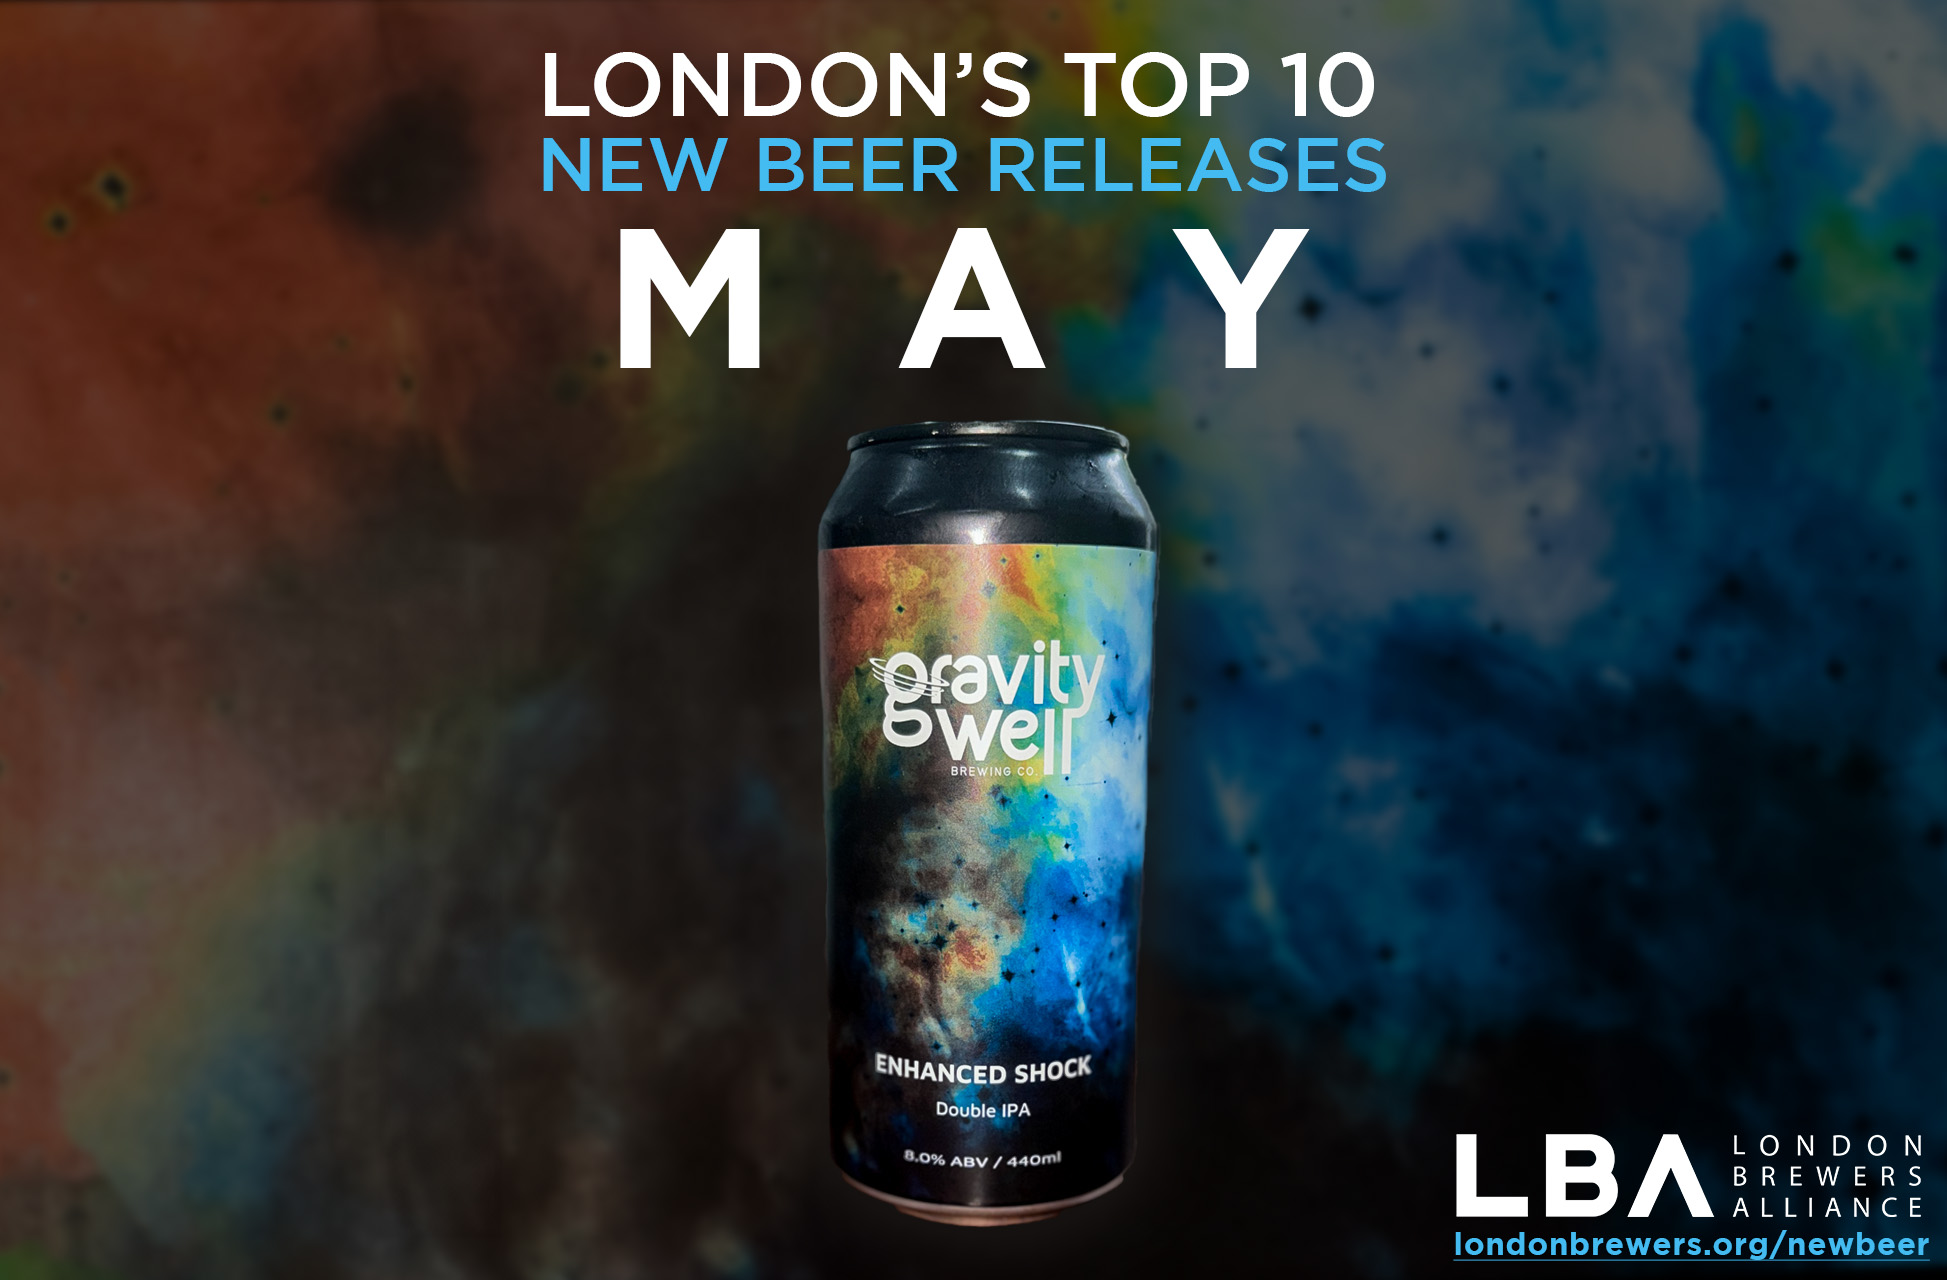 May's Top New Beer Releases